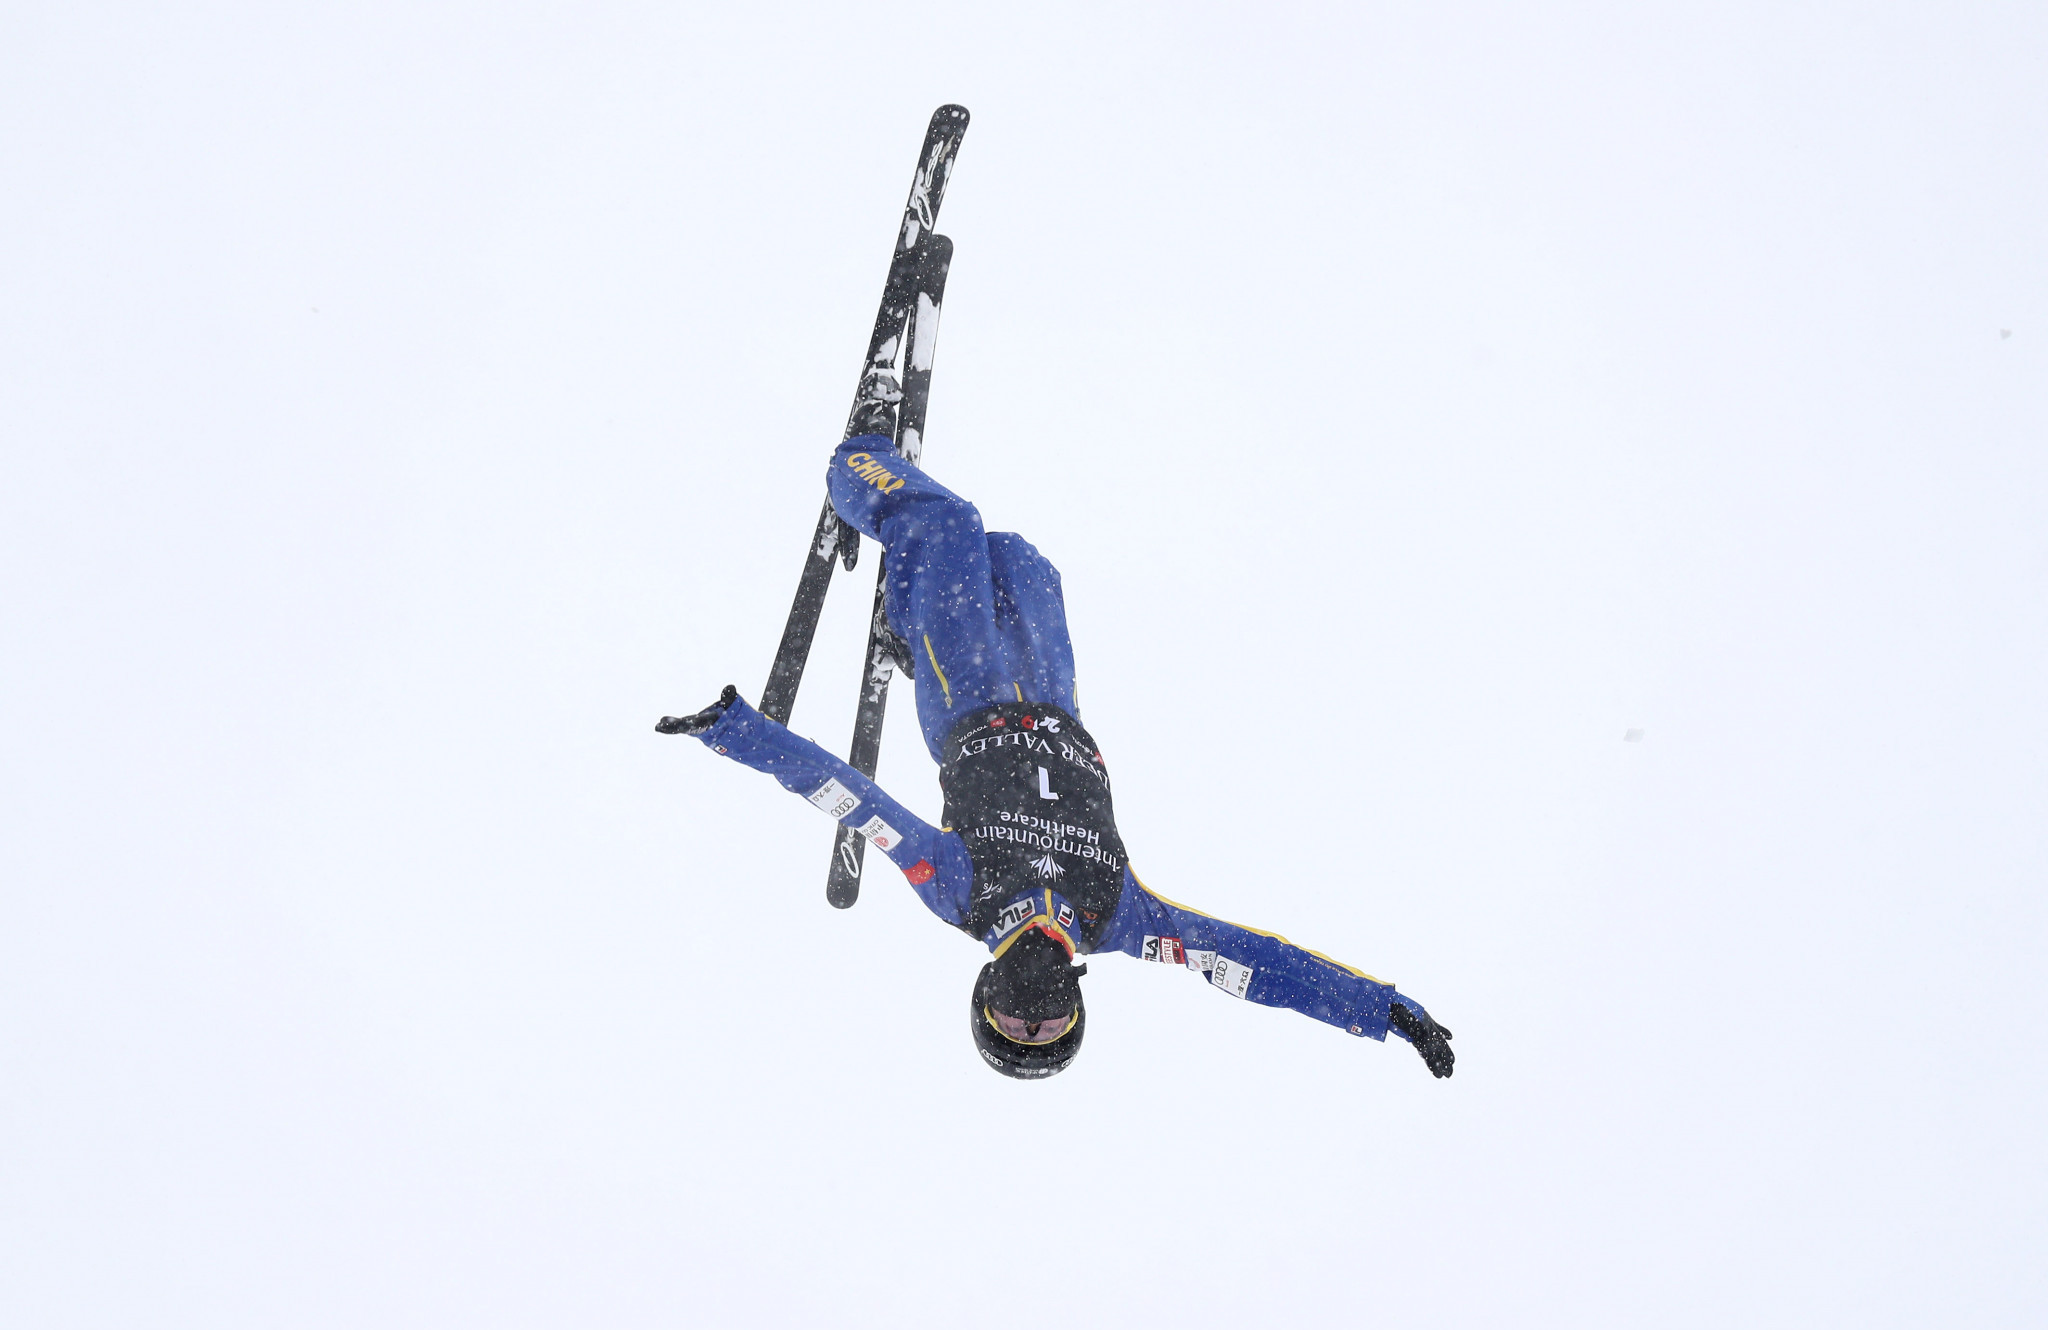 China's Qi and Xu make it back-to-back home wins at Aerials World Cup